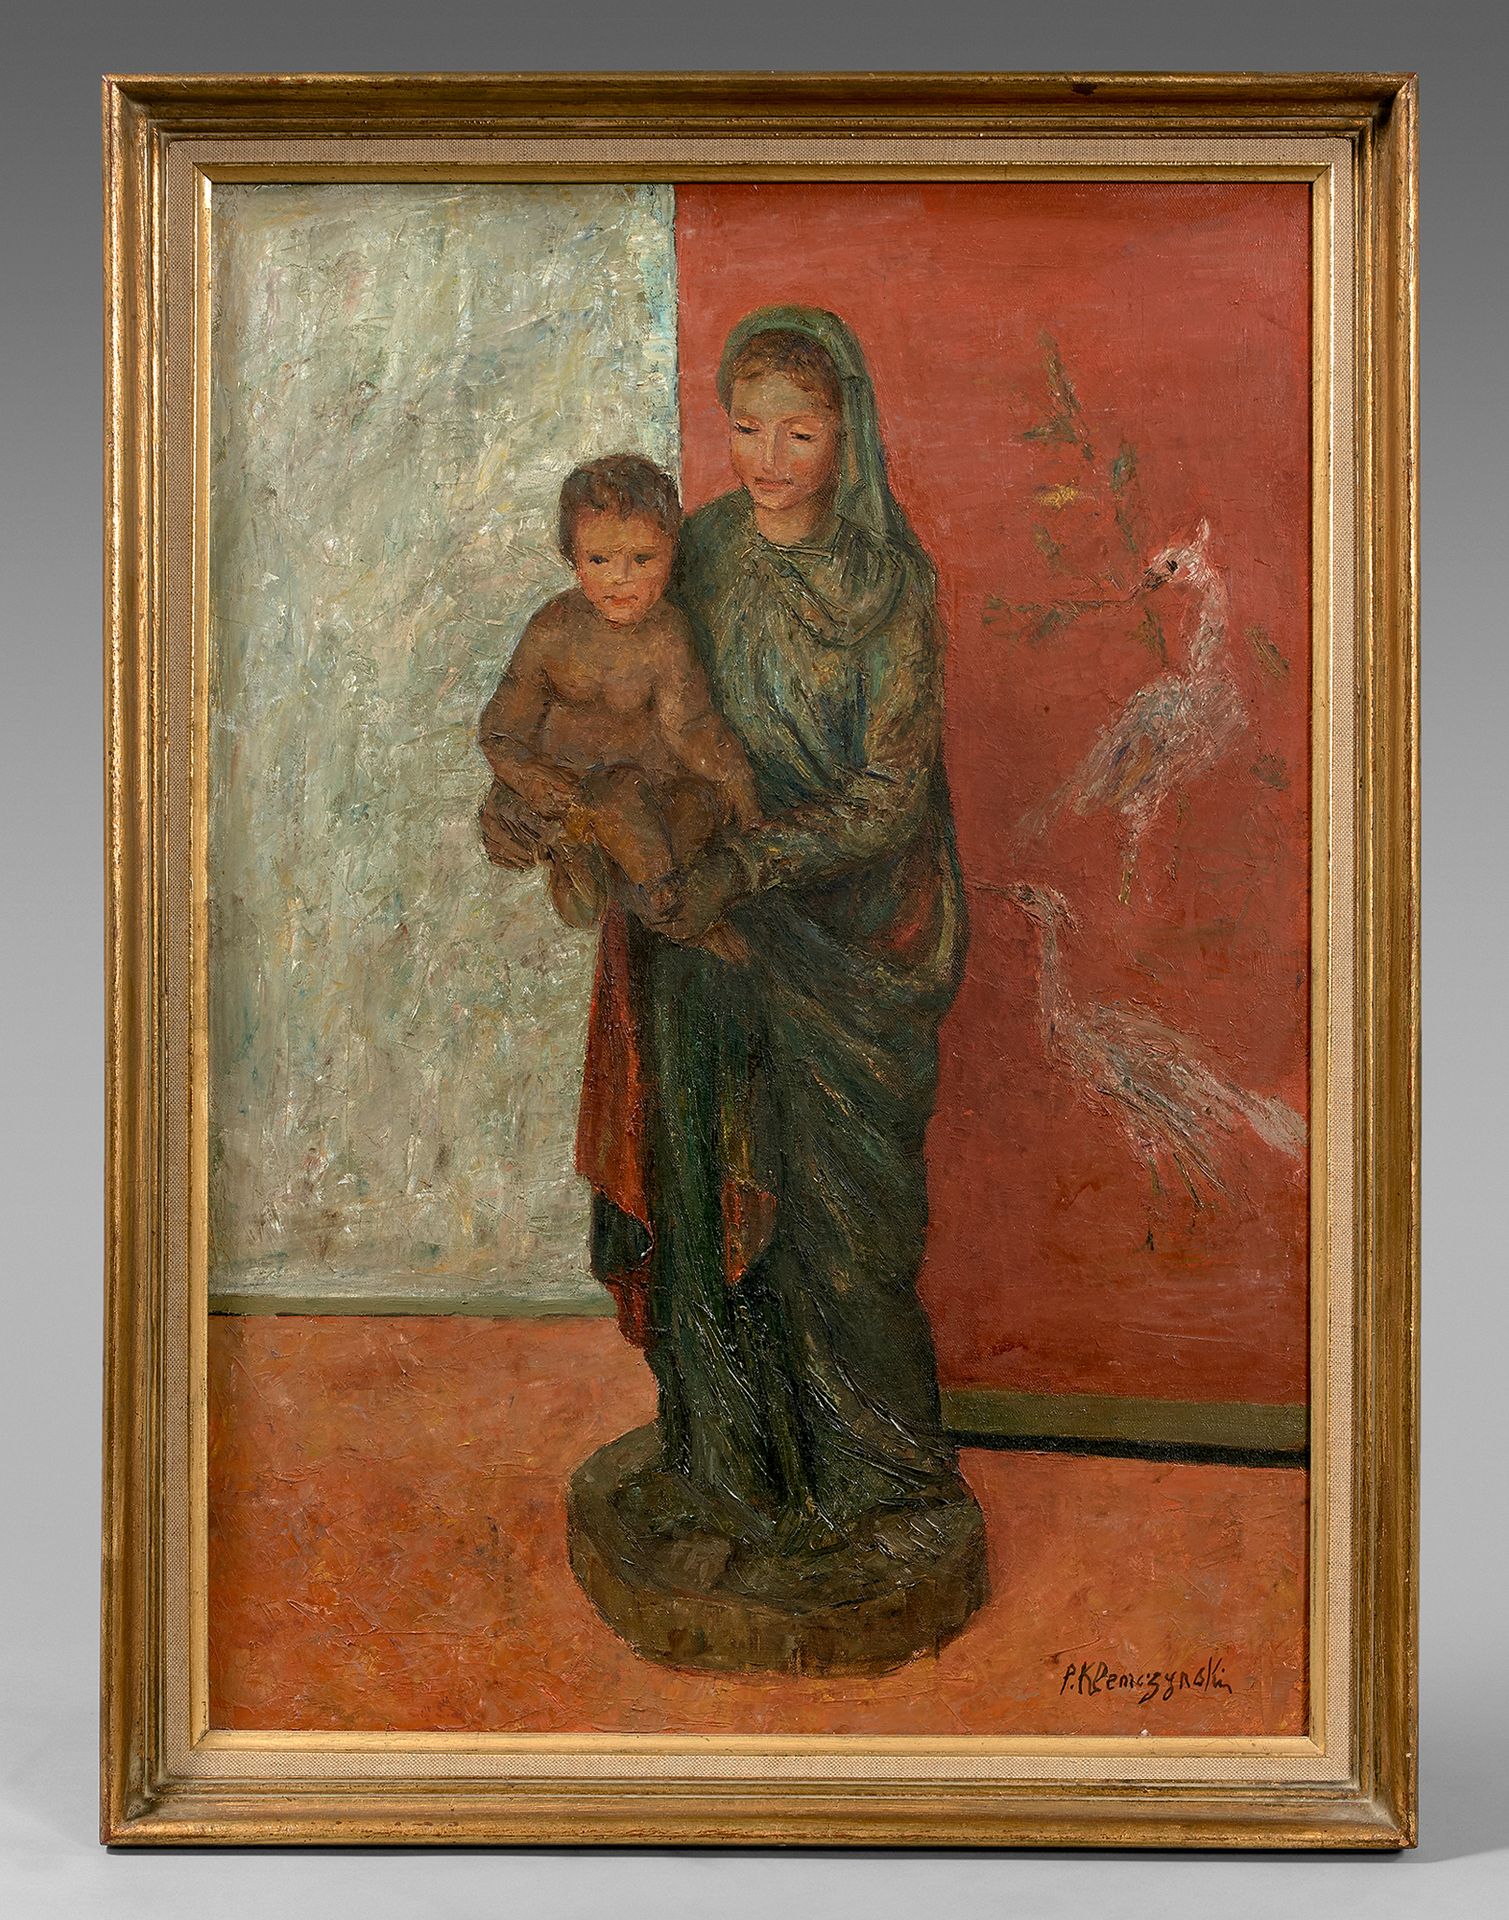 Pierre KLEMCZYNSKI Virgin and Child
Oil on canvas, signed lower right.
63 x 45 c&hellip;